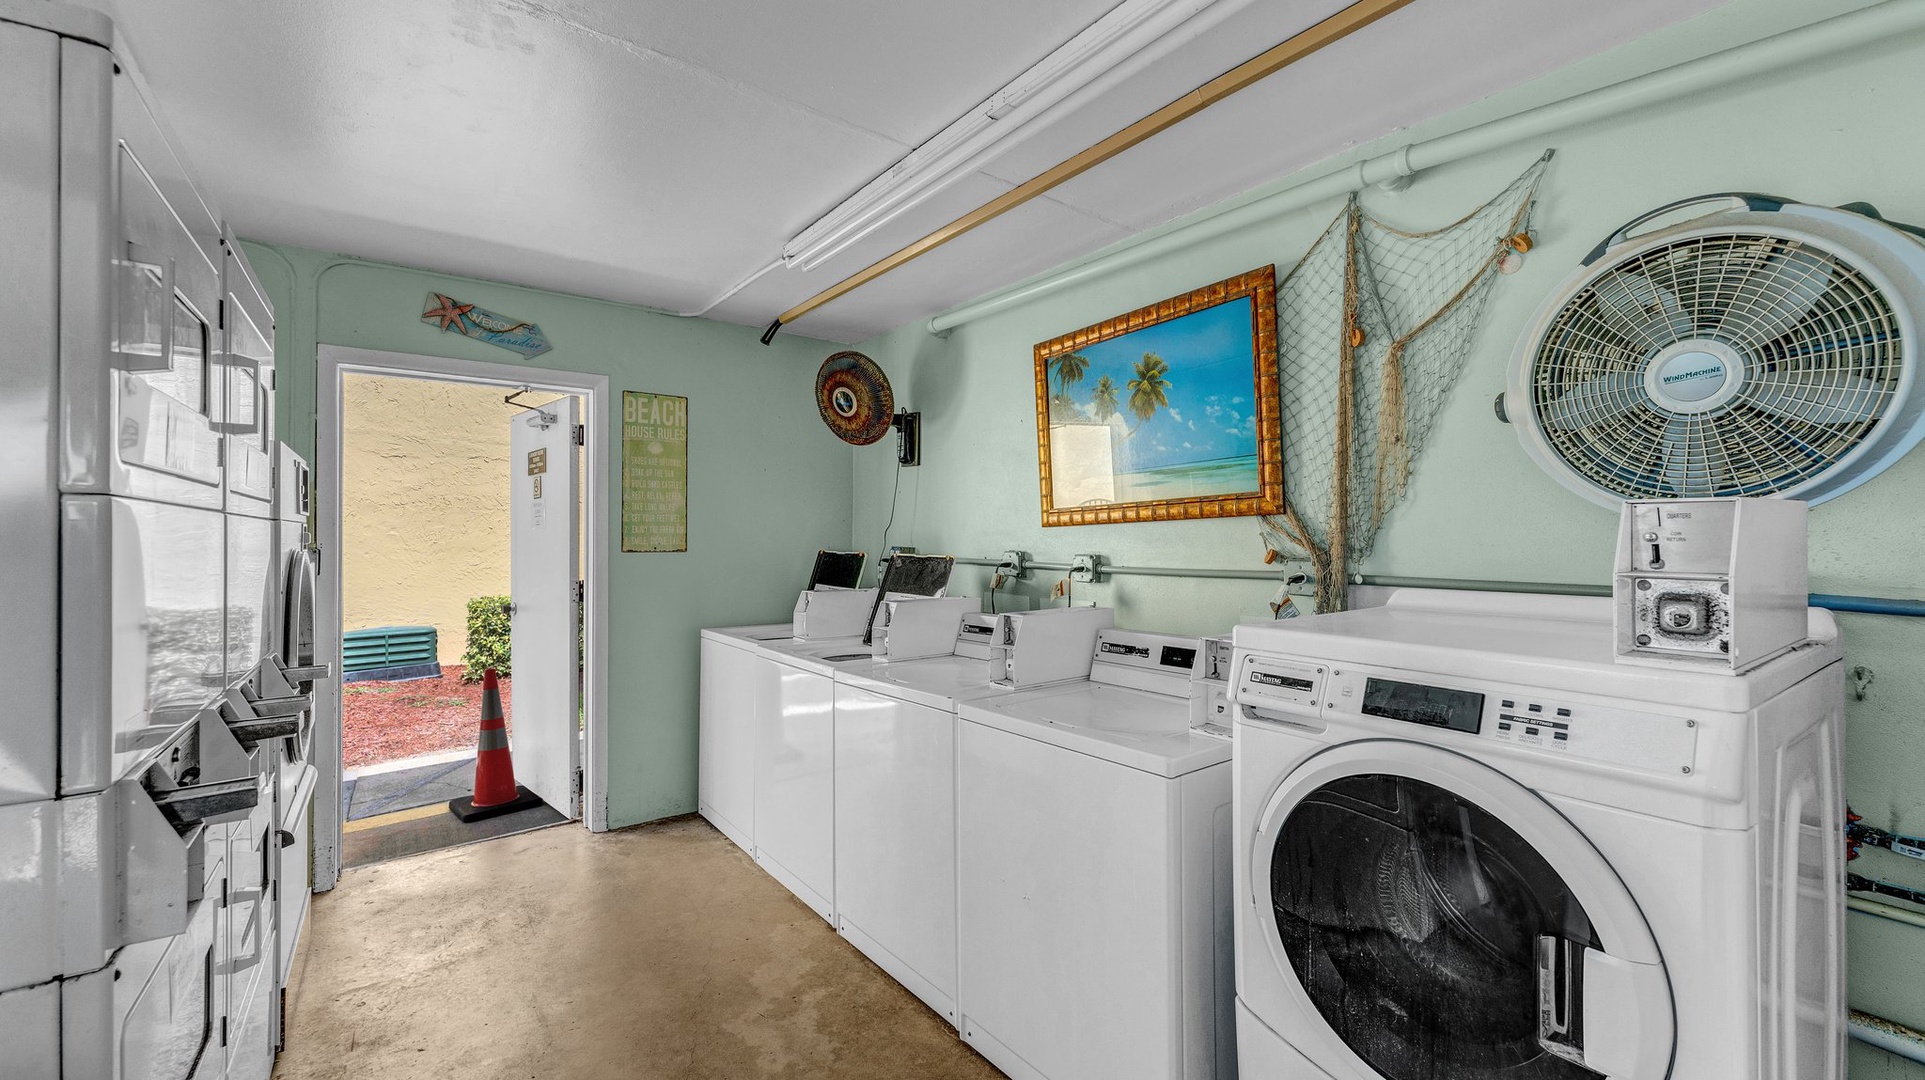 Communal, coin-operated laundry is available for guests